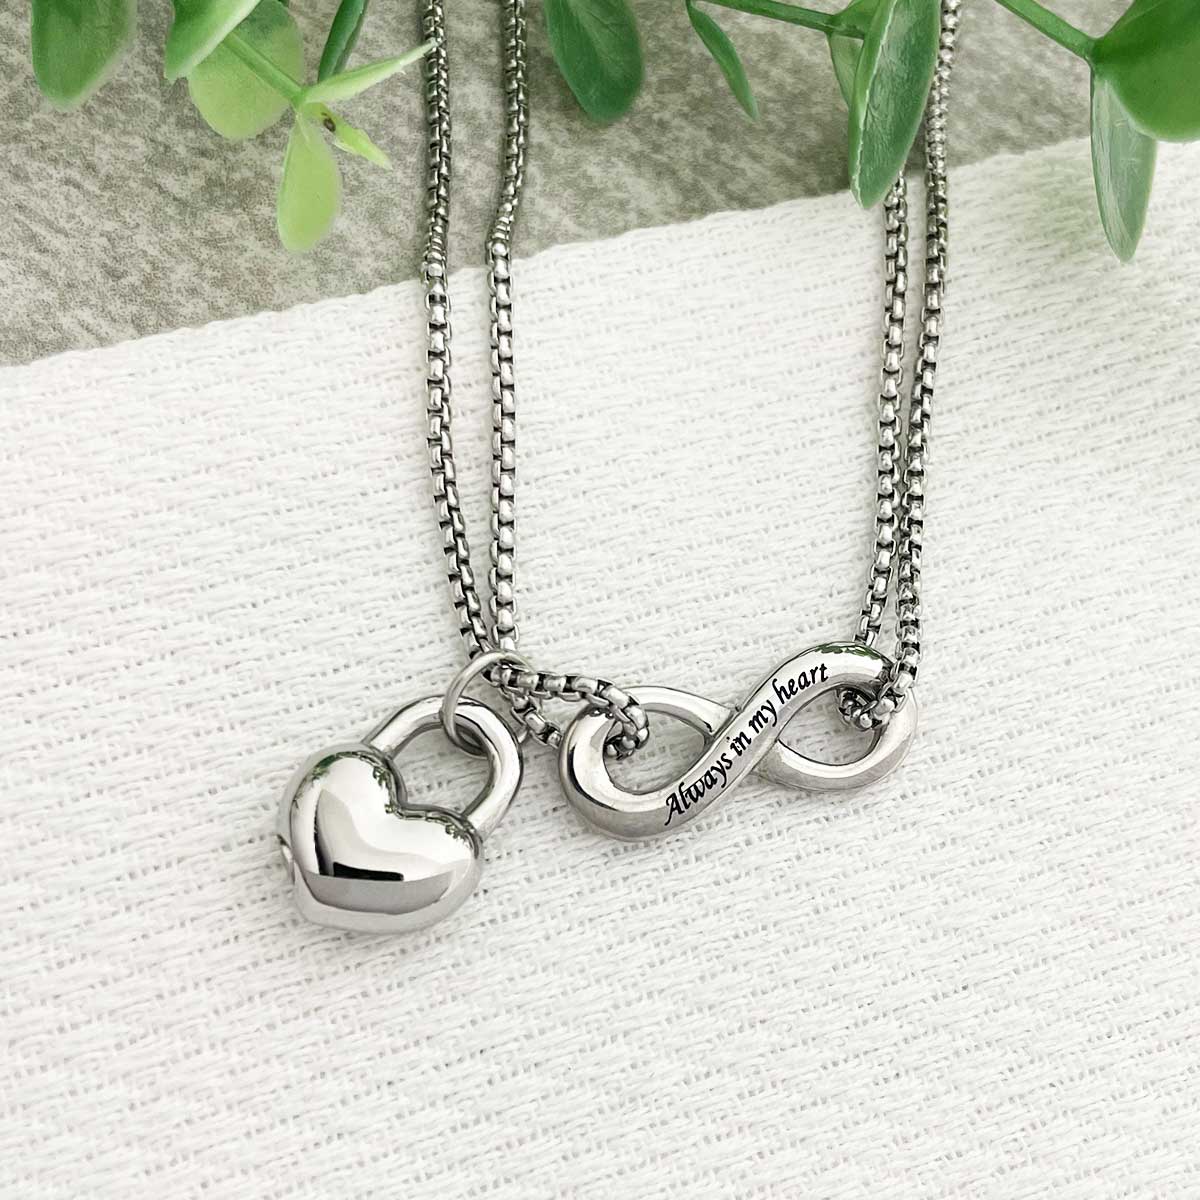 Customized Infinity Necklace with Heart Personalized Name Necklace 925